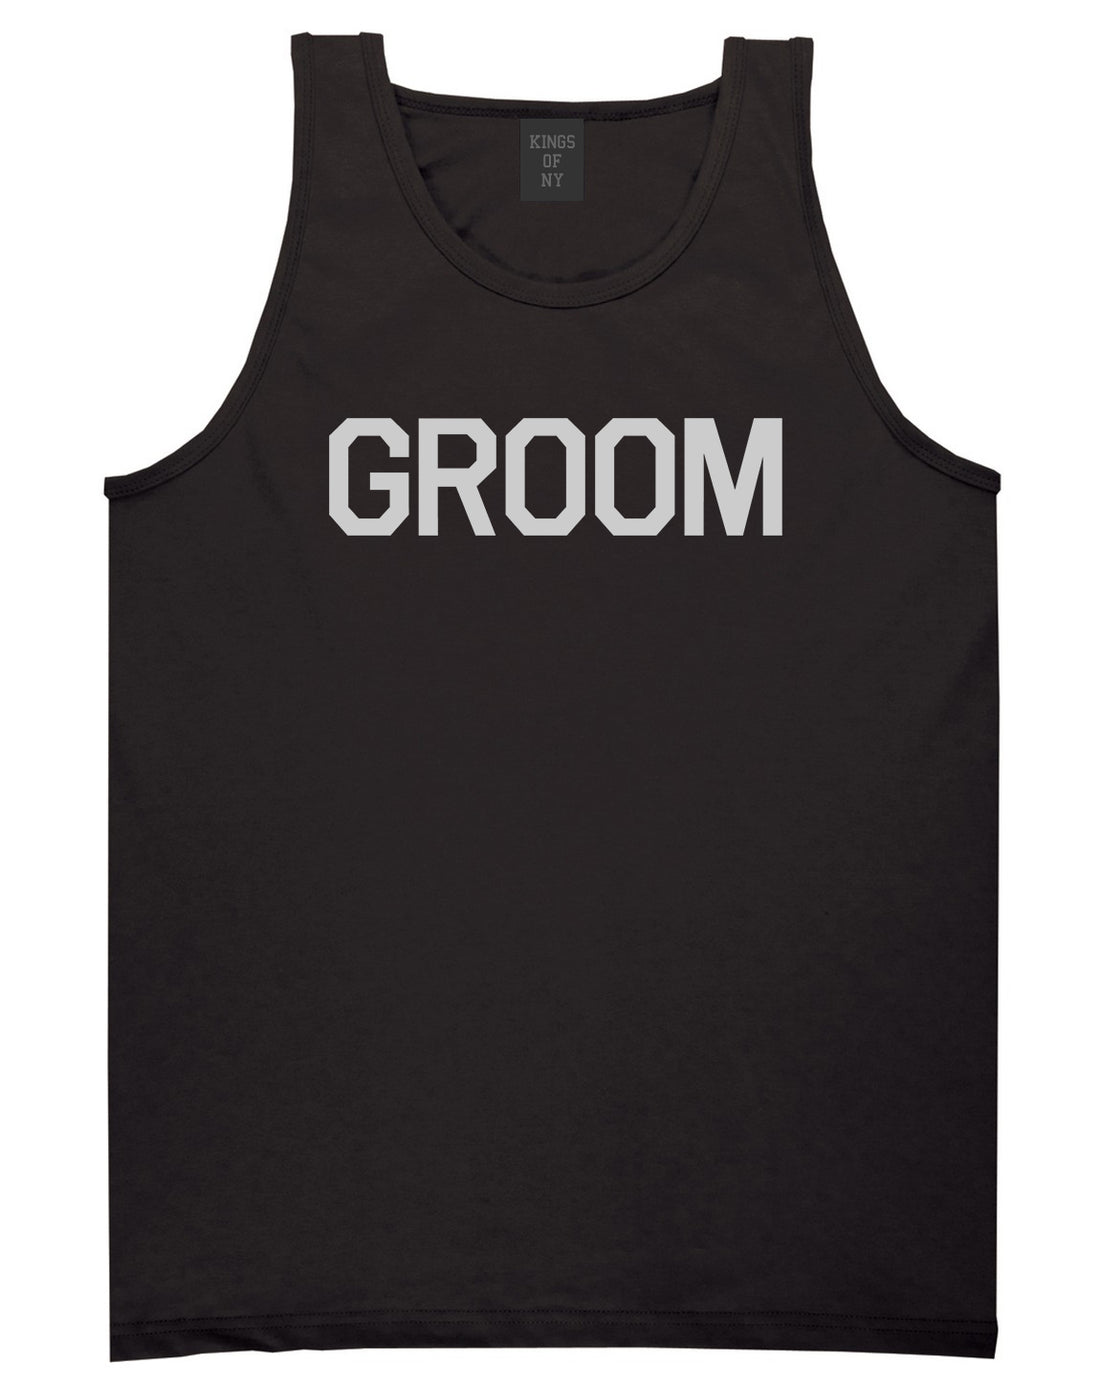 The Groom Bachelor Party Black Tank Top Shirt by Kings Of NY